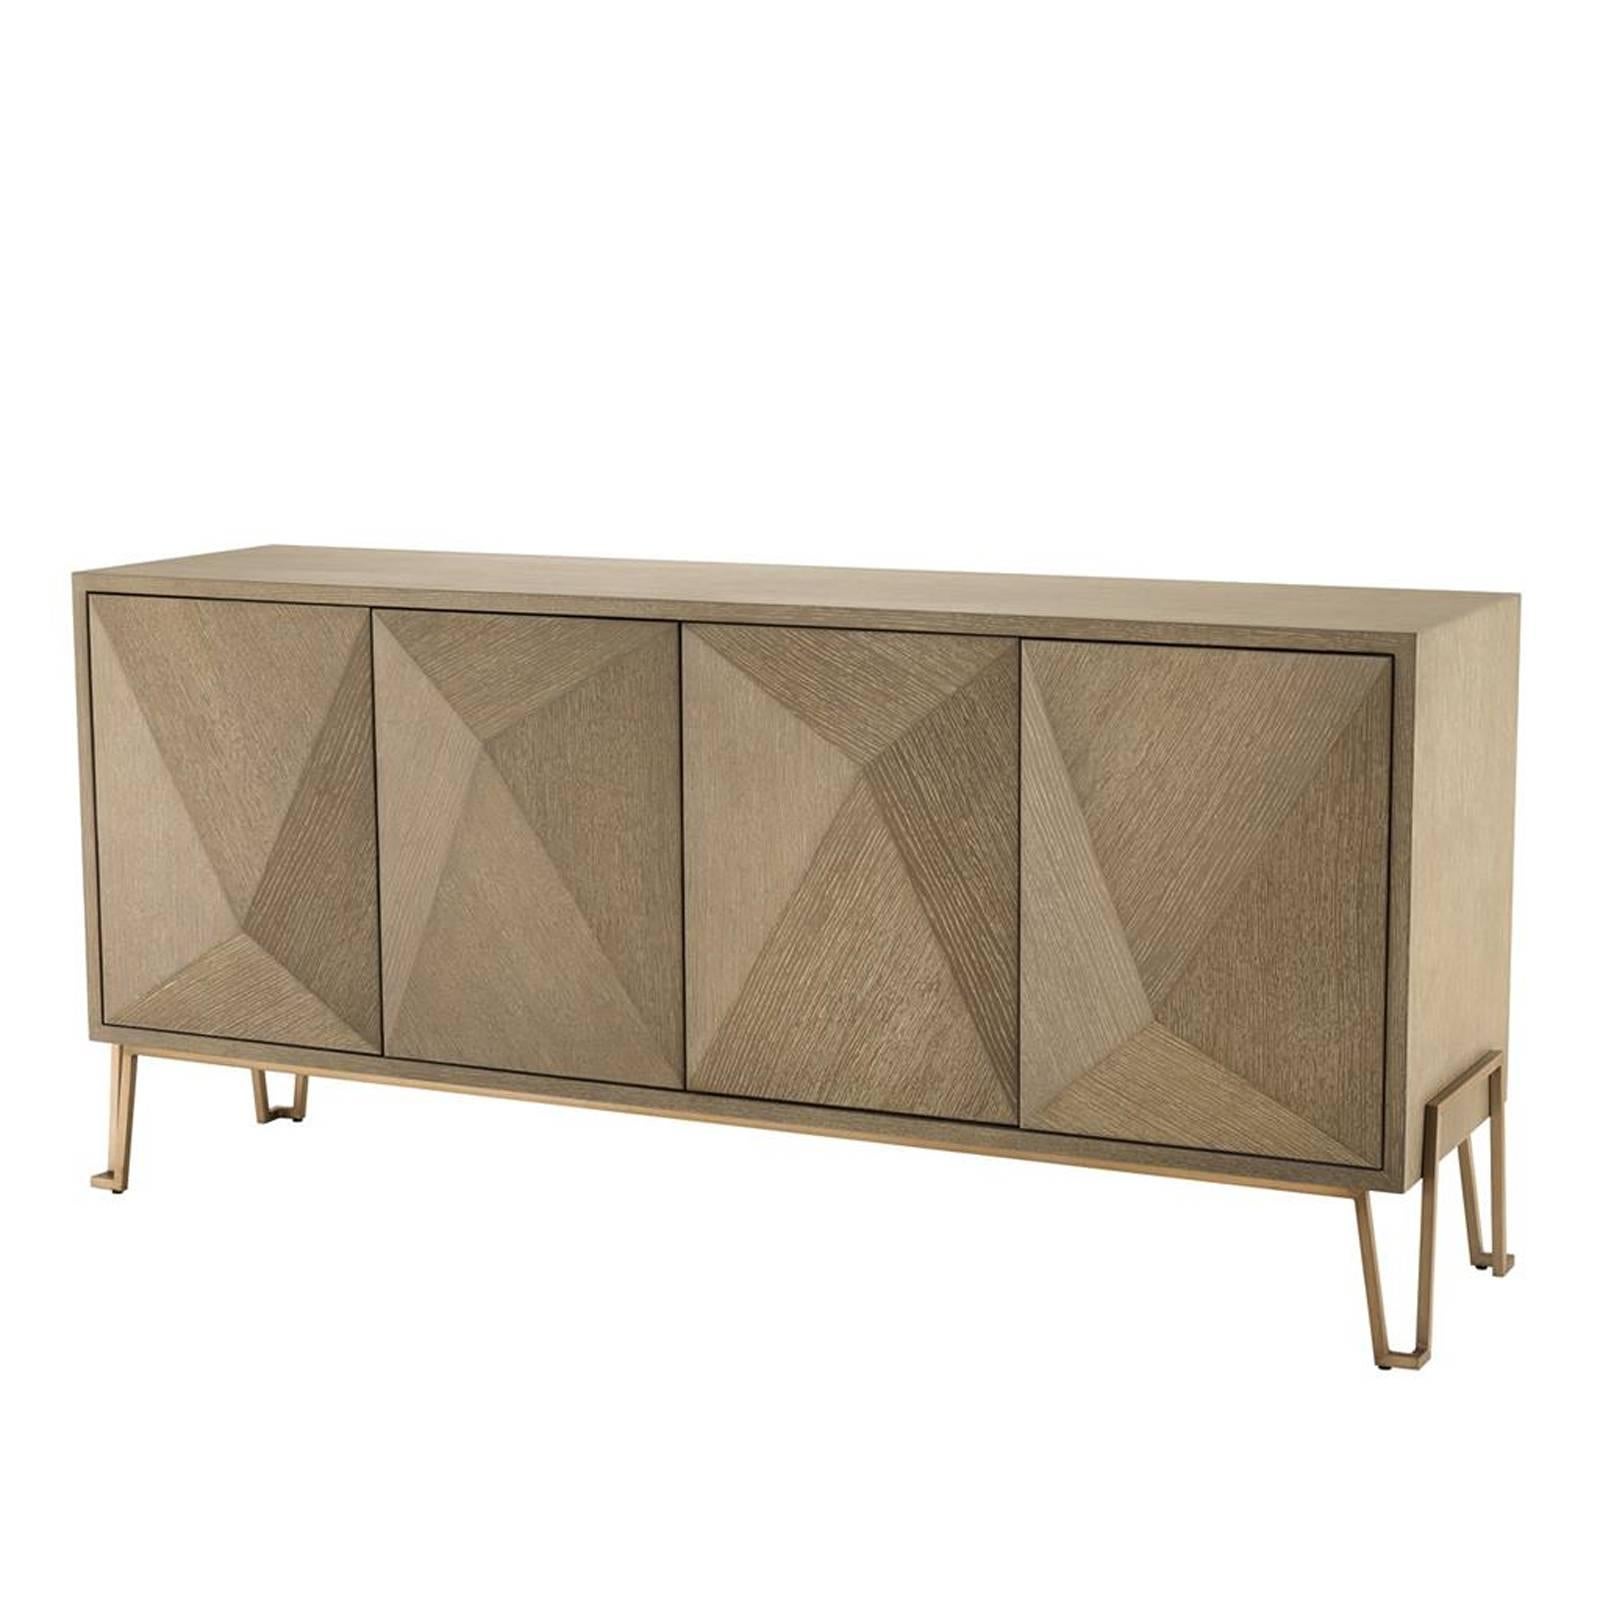 Catalaga Sideboard in Washed Oak Veneer and Brass Finish